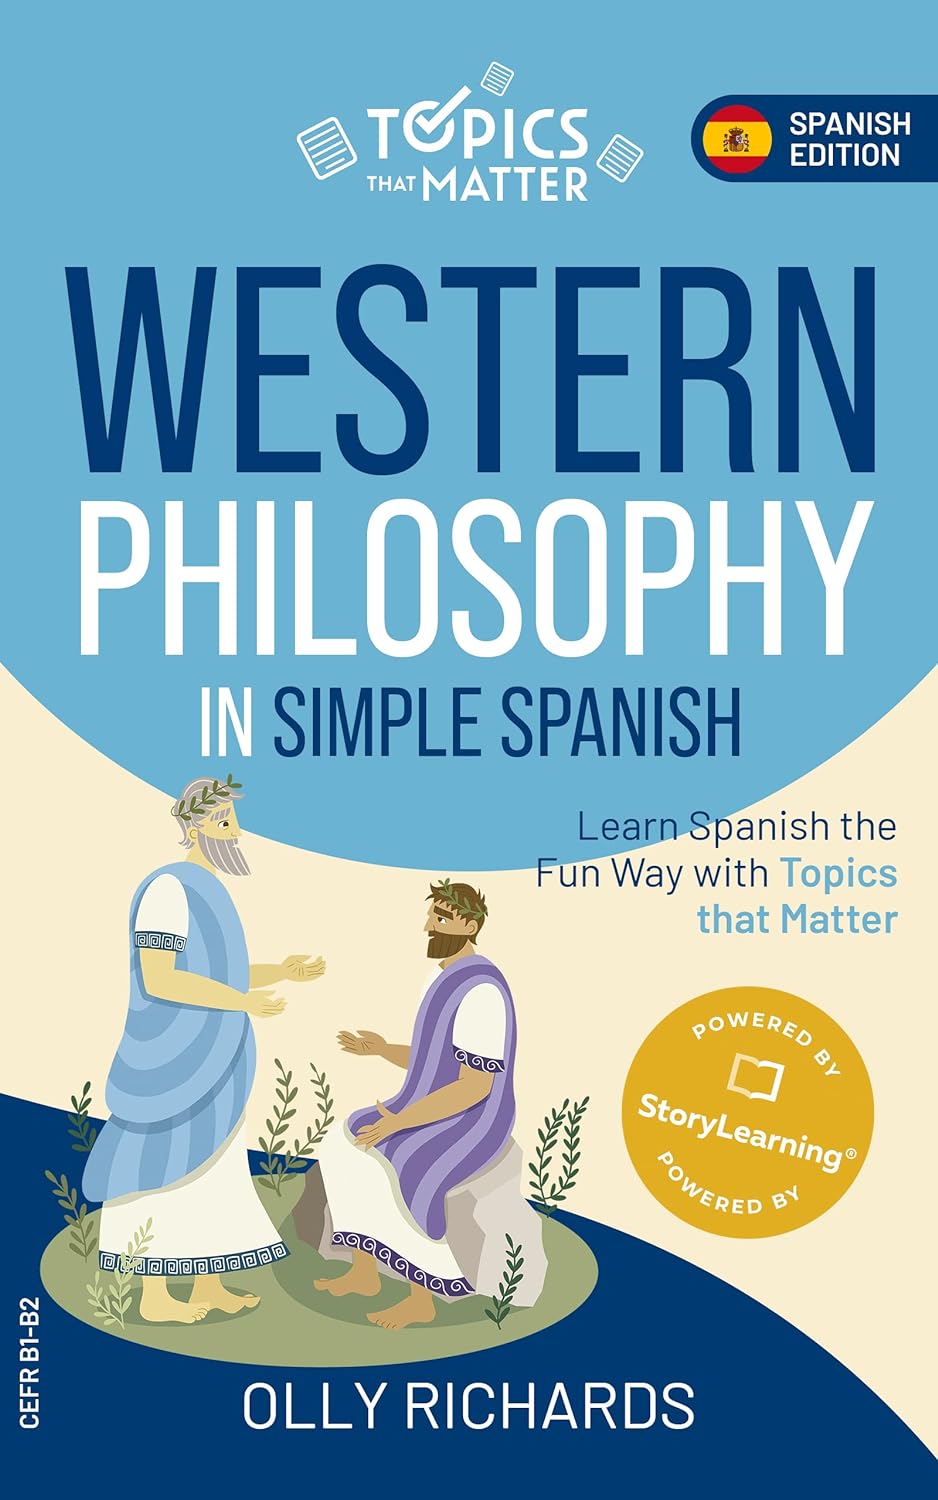 Western Philosophy in Simple Spanish: Learn Spanish the Fun Way with Topics that Matter (Topics that Matter: Spanish Edition)